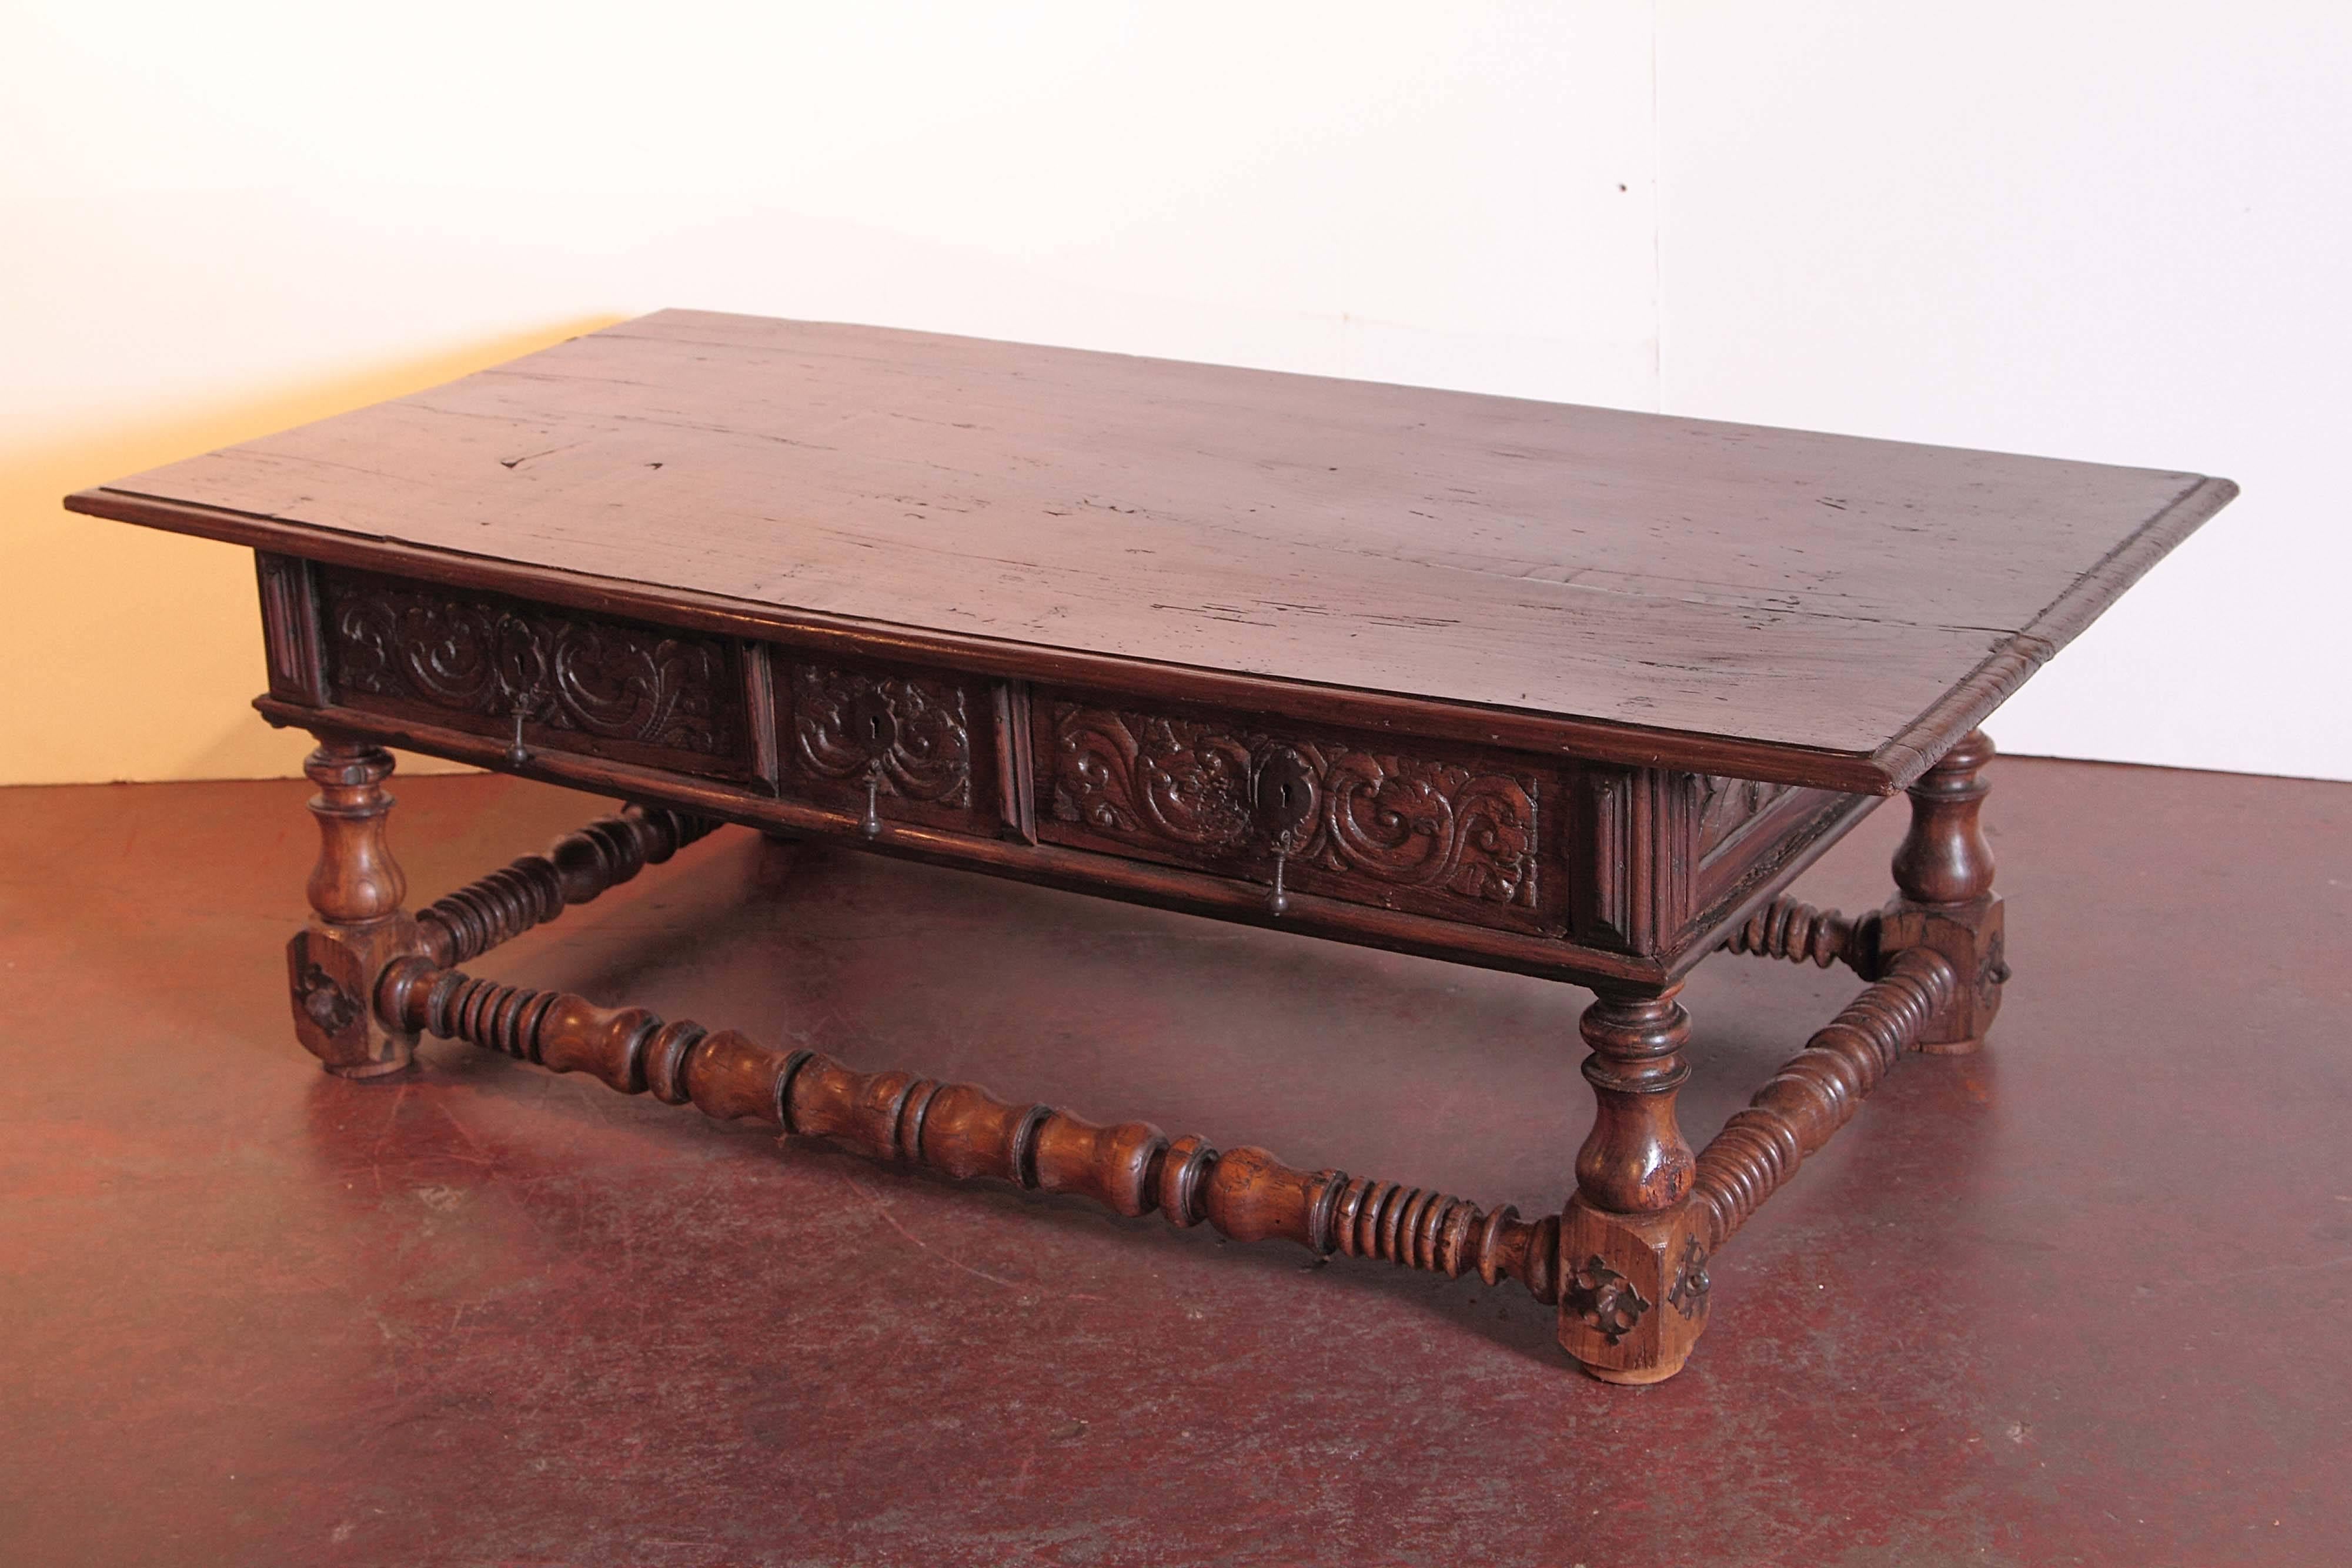 Make a beautiful statement in your living room with this elegant fruitwood coffee table from Spain. Crafted, circa 1780, the antique table is hand-carved on all four sides including the three drawers across the front with their original wrought iron